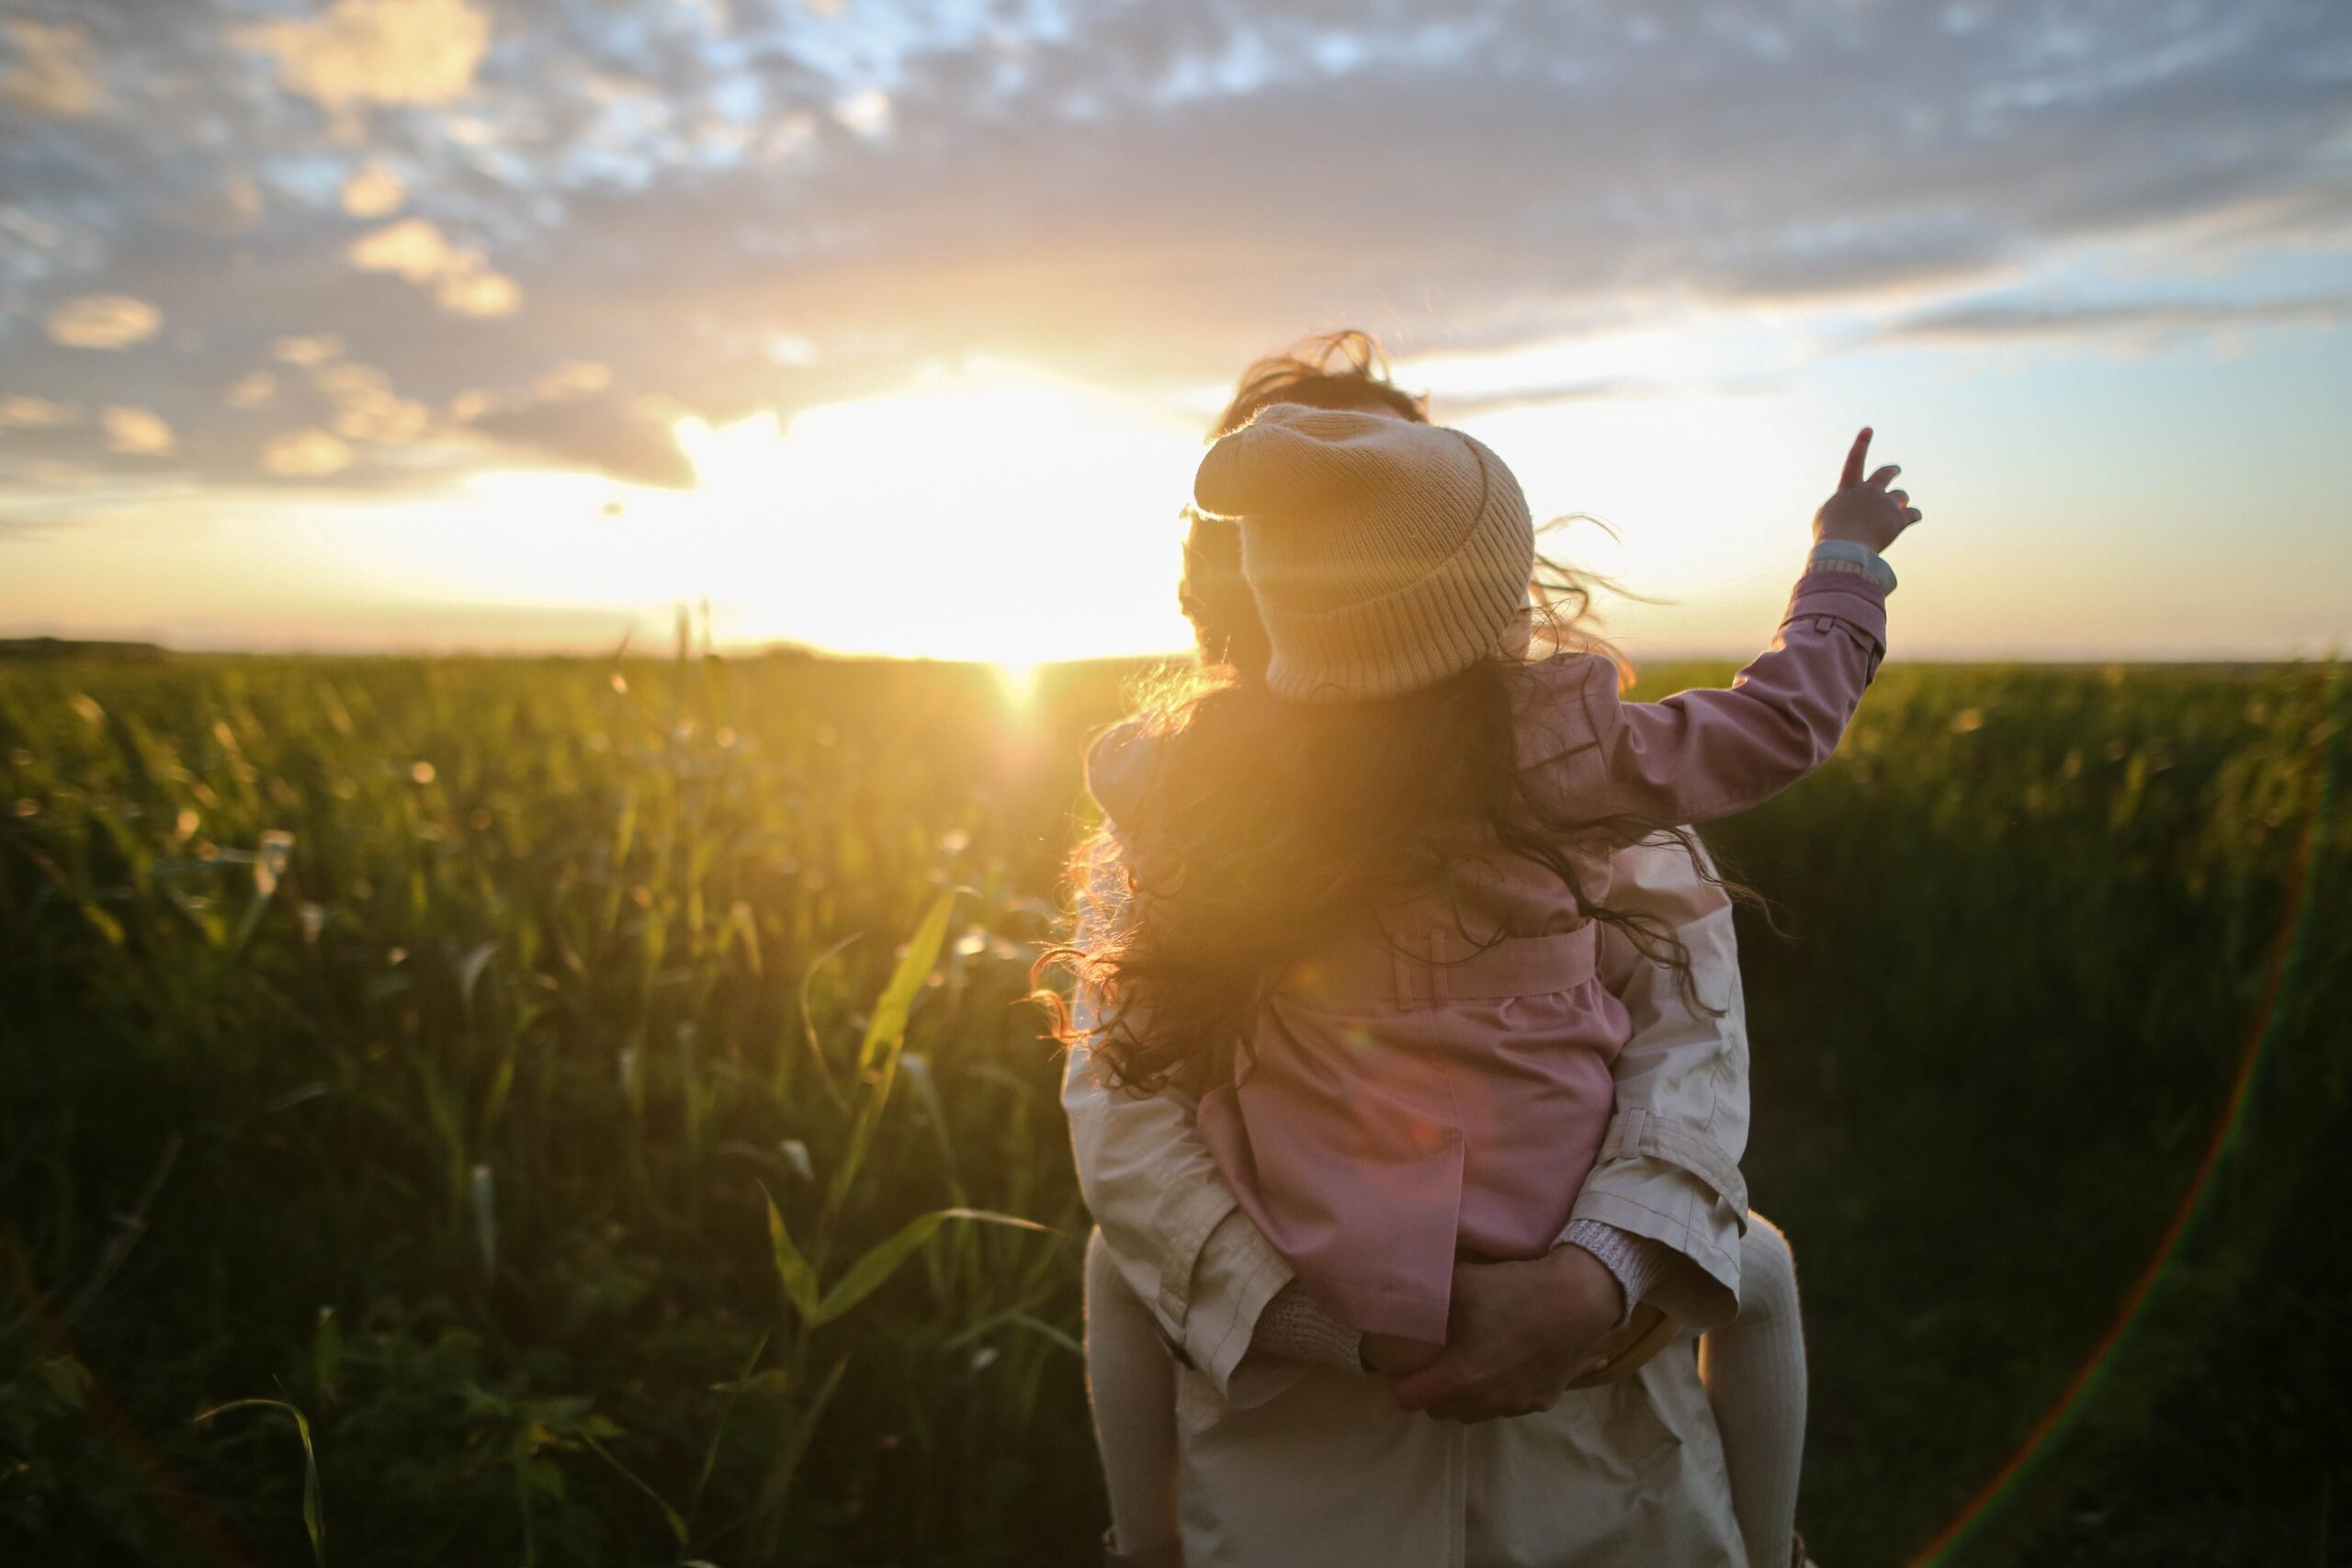 A young child in a beanie and jacket is being lifted up by an adult in a field in the State of New Jersey at sunset, pointing towards the sky as the sun casts a warm glow around